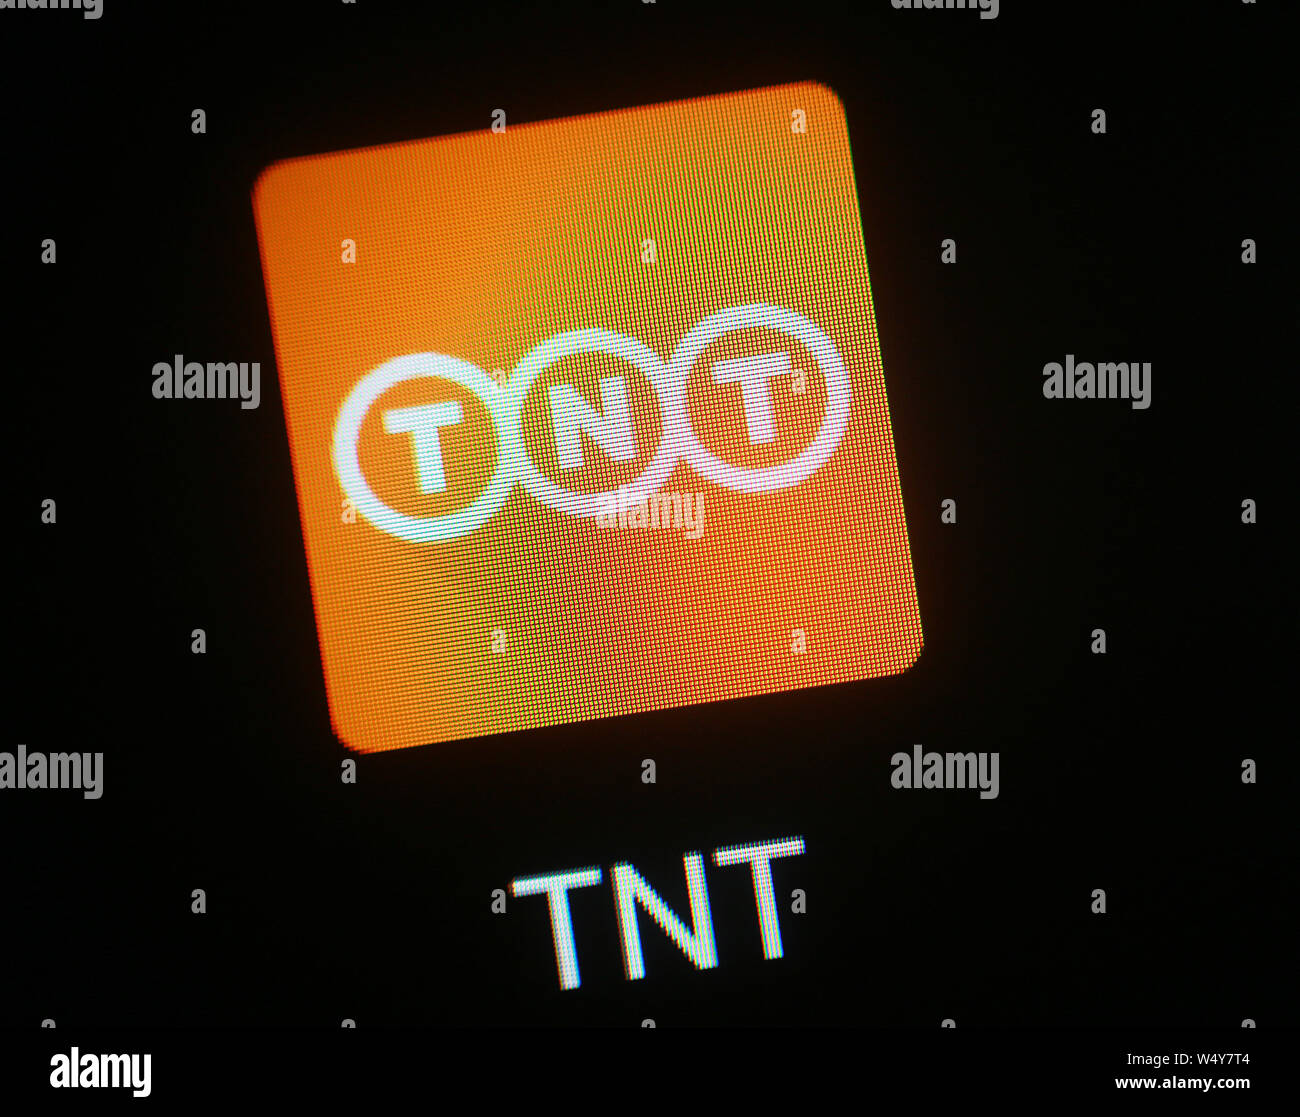 TNT Express application icon on computer display. Stock Photo